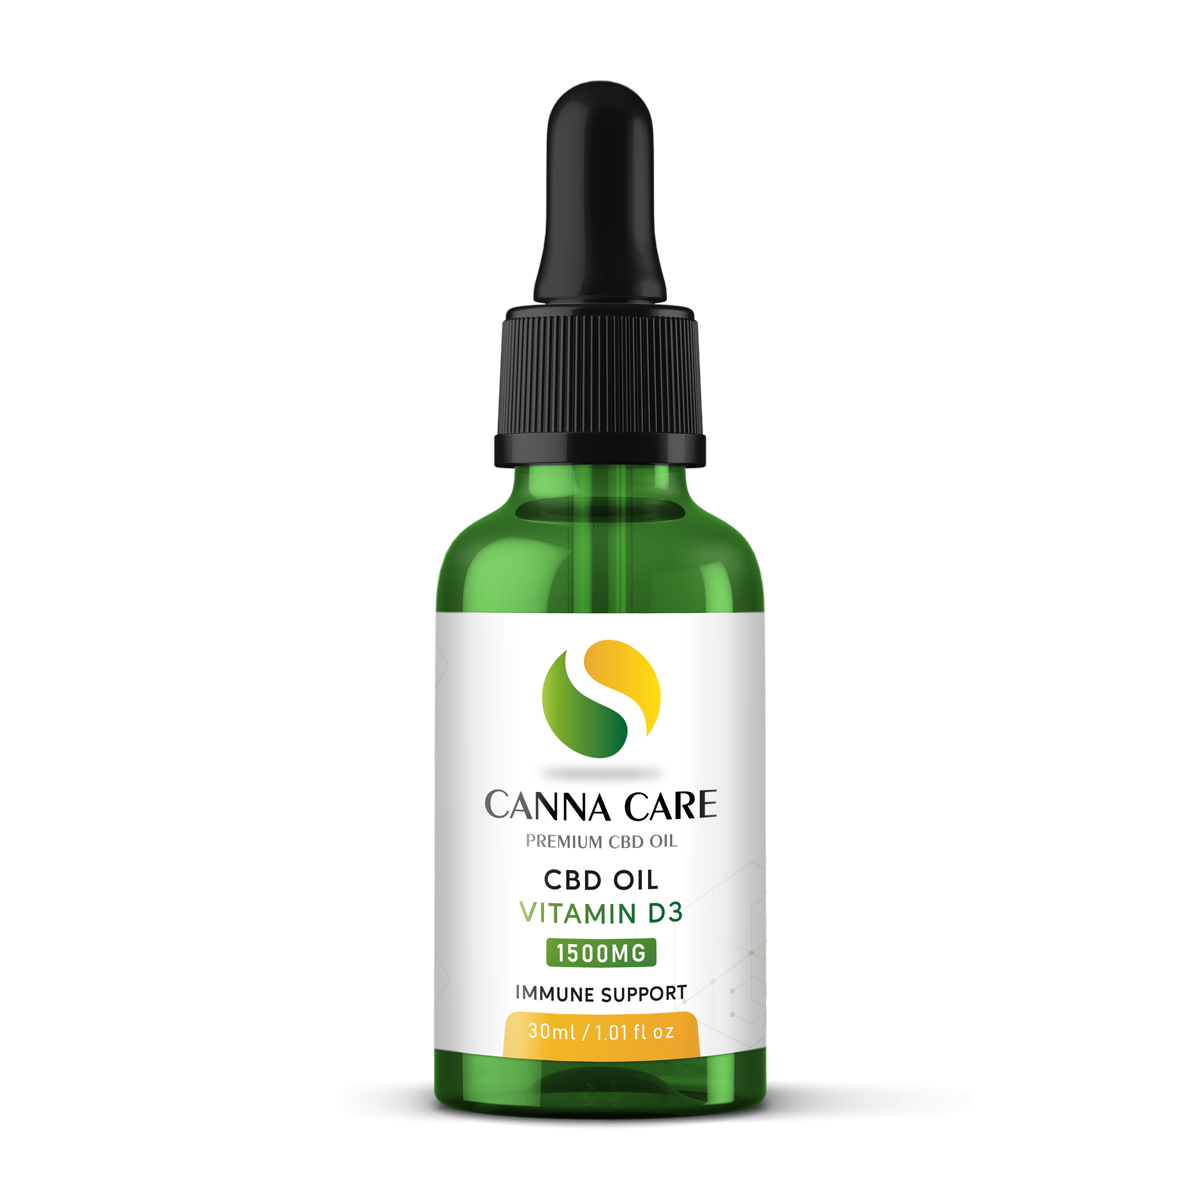 https://cannacare.gi/wp-content/uploads/2021/07/Immune-support.png